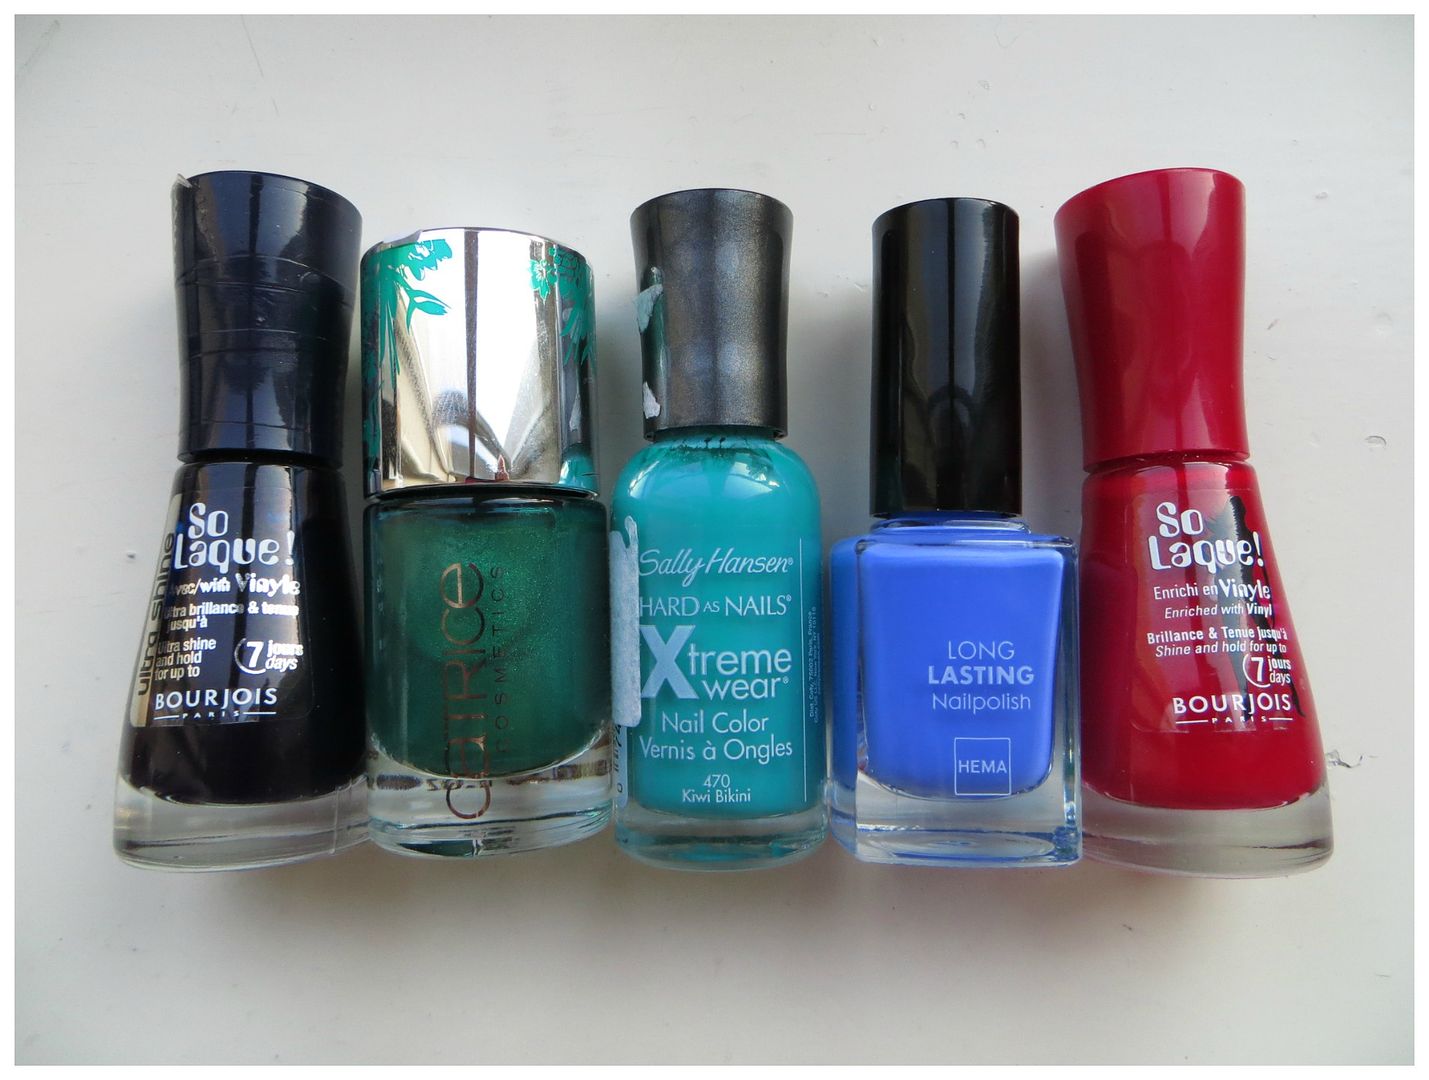 1. "Top 10 Best Toe Nail Colors for Summer" - wide 1